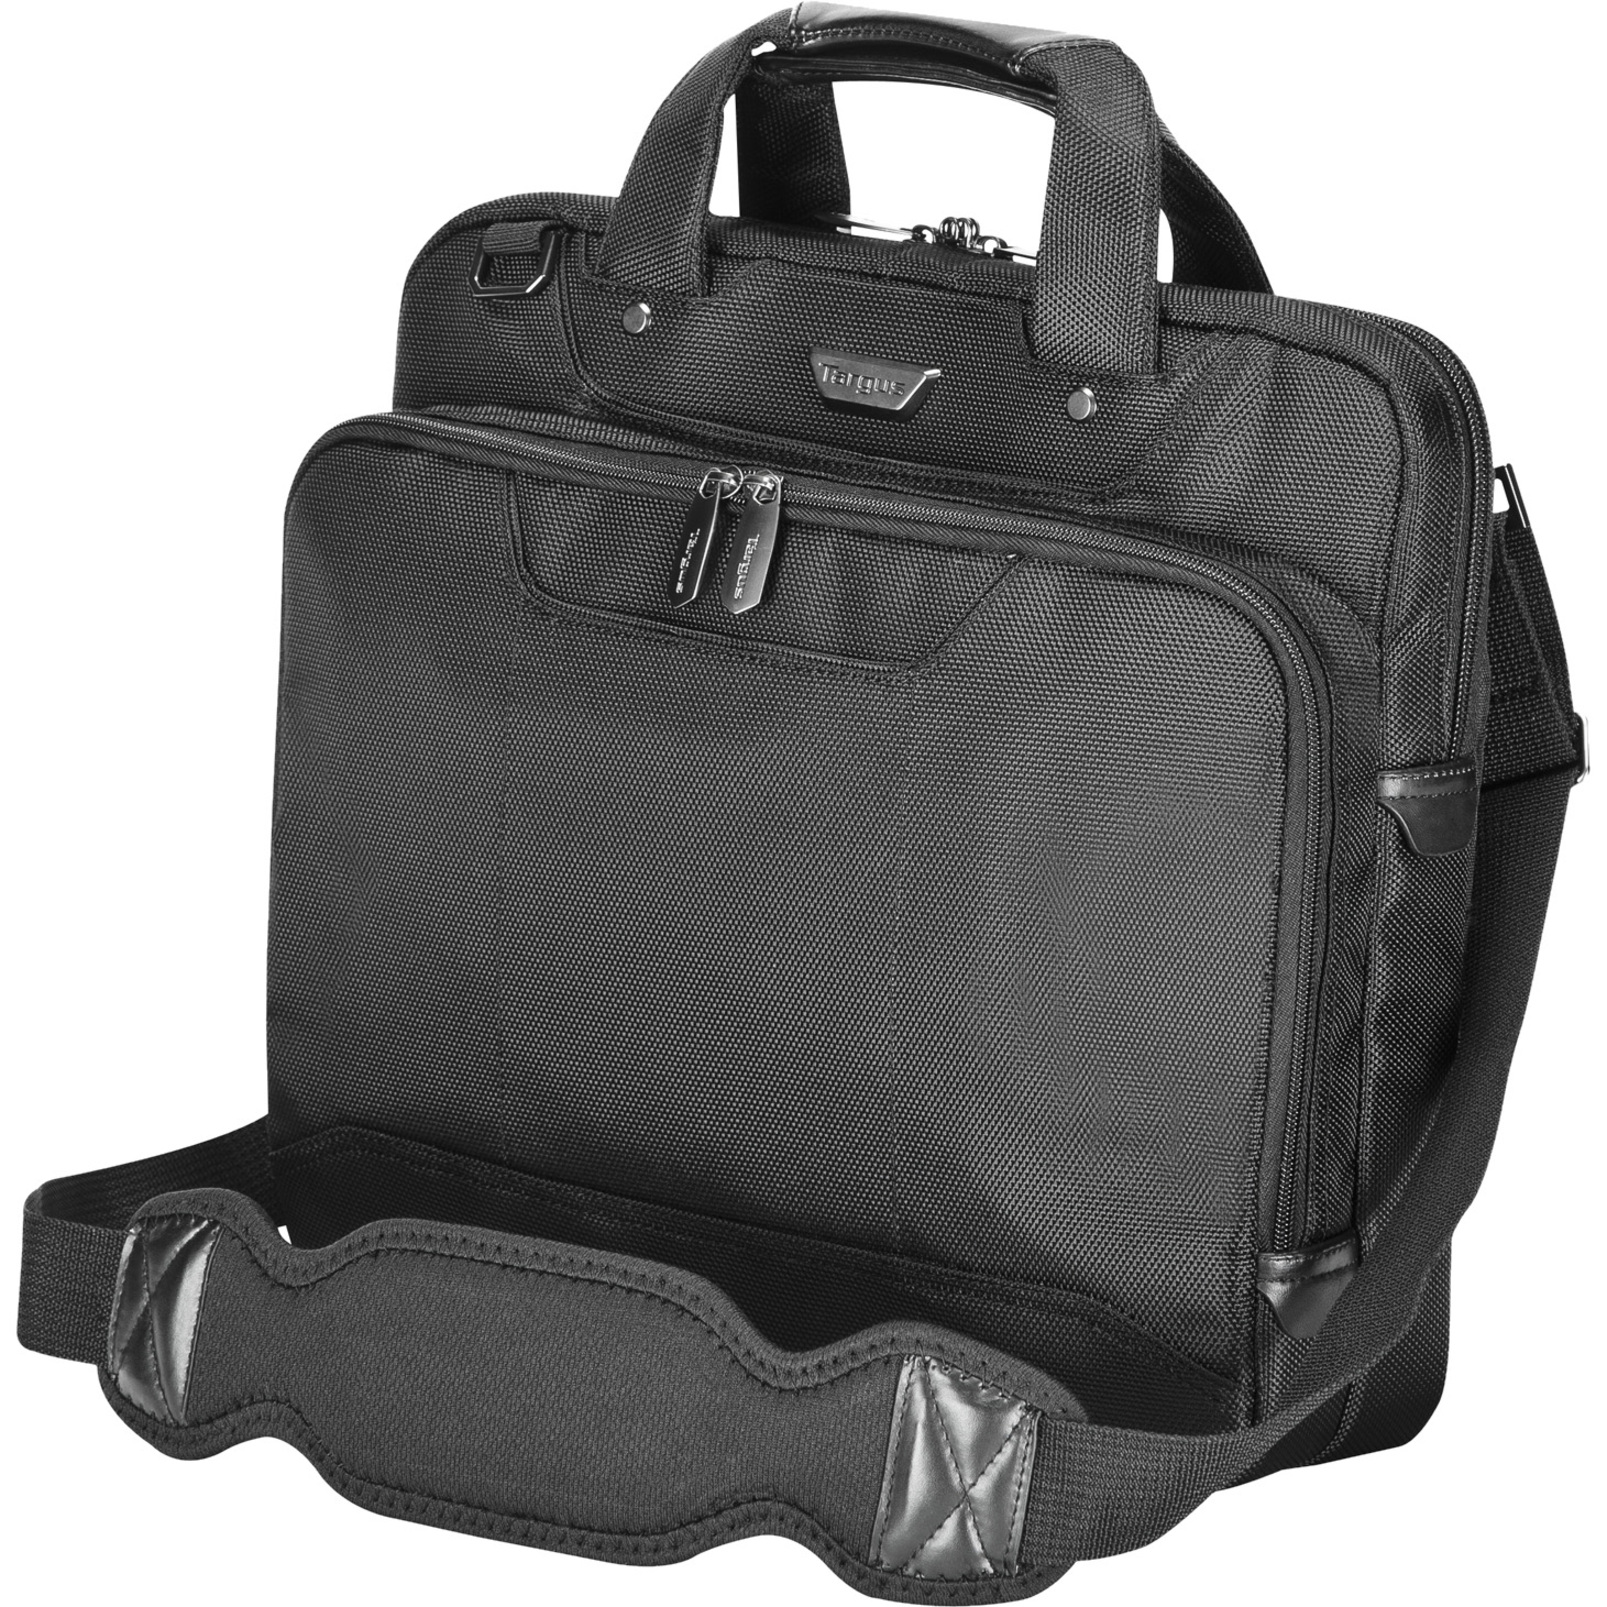 Targus Corporate Traveler CUCT02UT14 Carrying Case for 14" Notebook - image 2 of 3